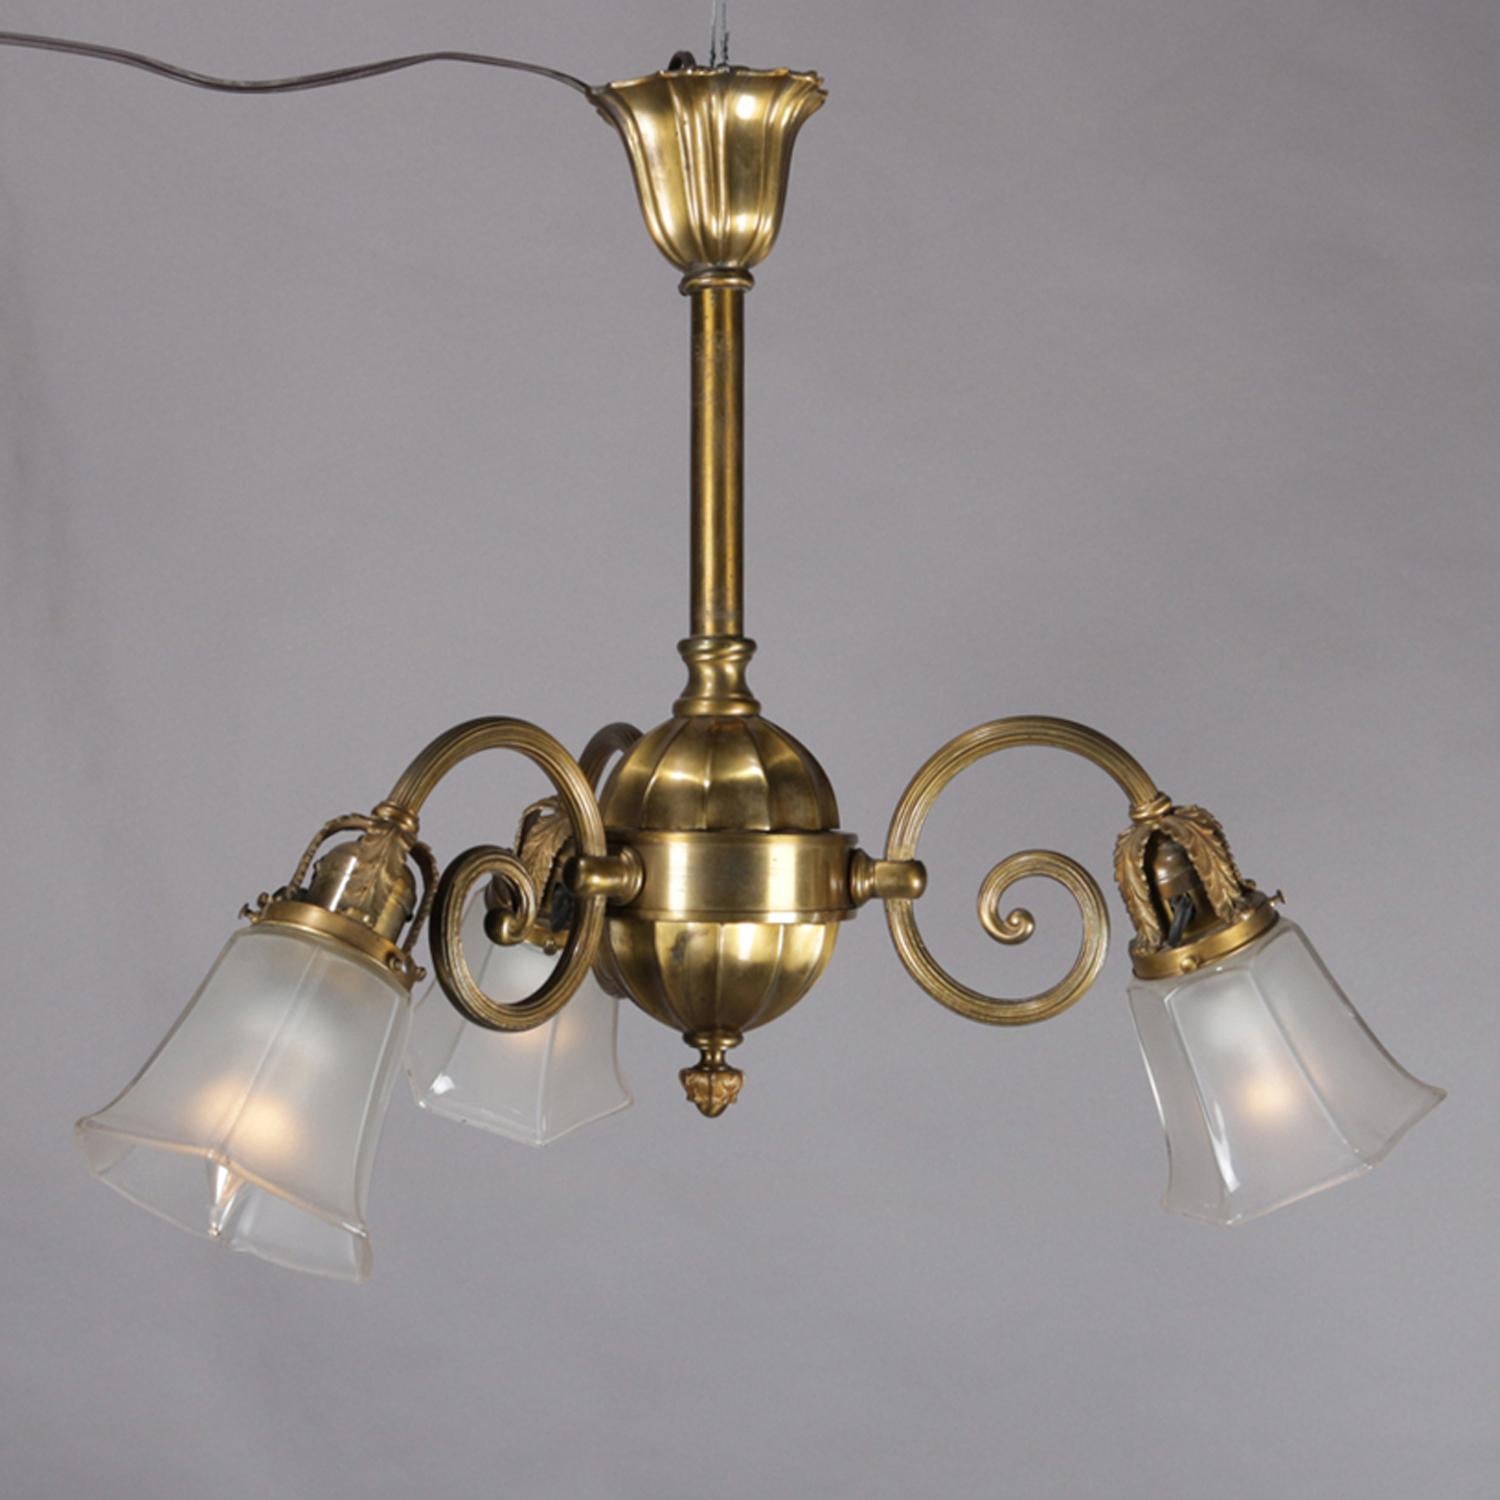 A vintage branch chandelier features brass frame with column terminating in faceted pendant and having three scroll arms with lights having frosted glass shades, circa 1920.

***DELIVERY NOTICE – Due to COVID-19 we are employing NO-CONTACT PRACTICES